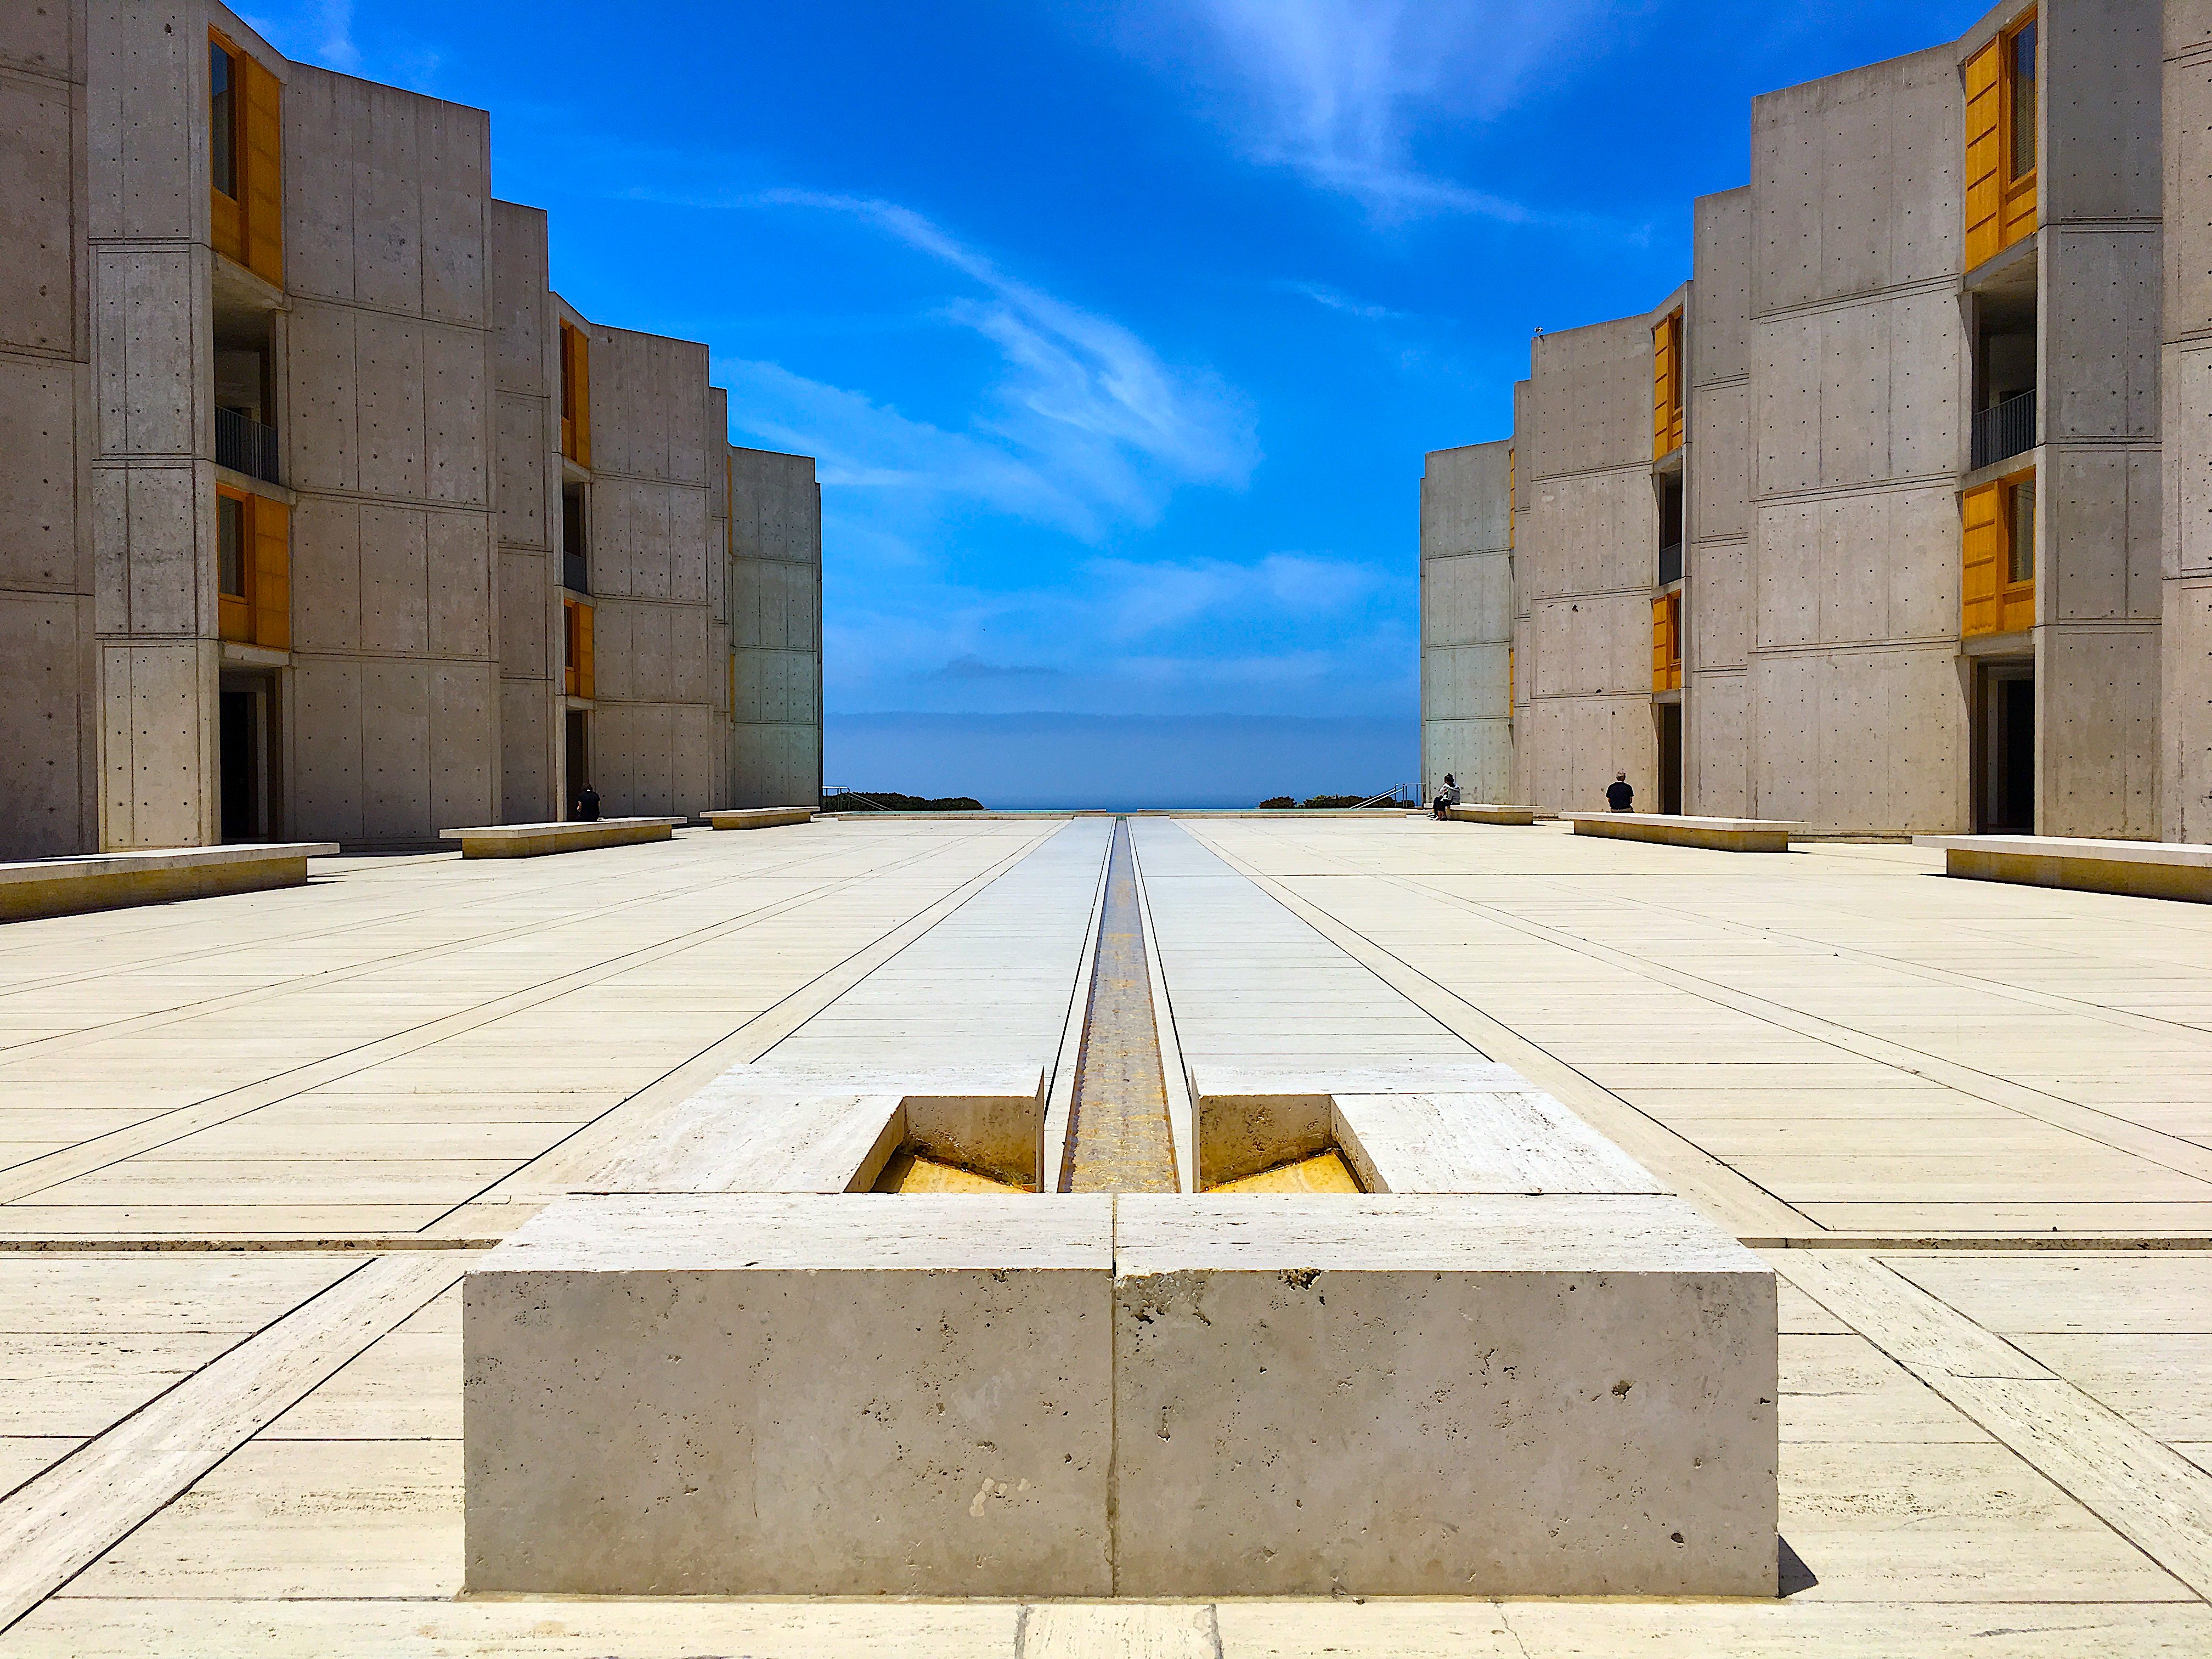 Figure 2 Codera23, The Salk Institute for Biological Studies completed in 1965, digital image, Wikimedia Commons, July 3, 2019.